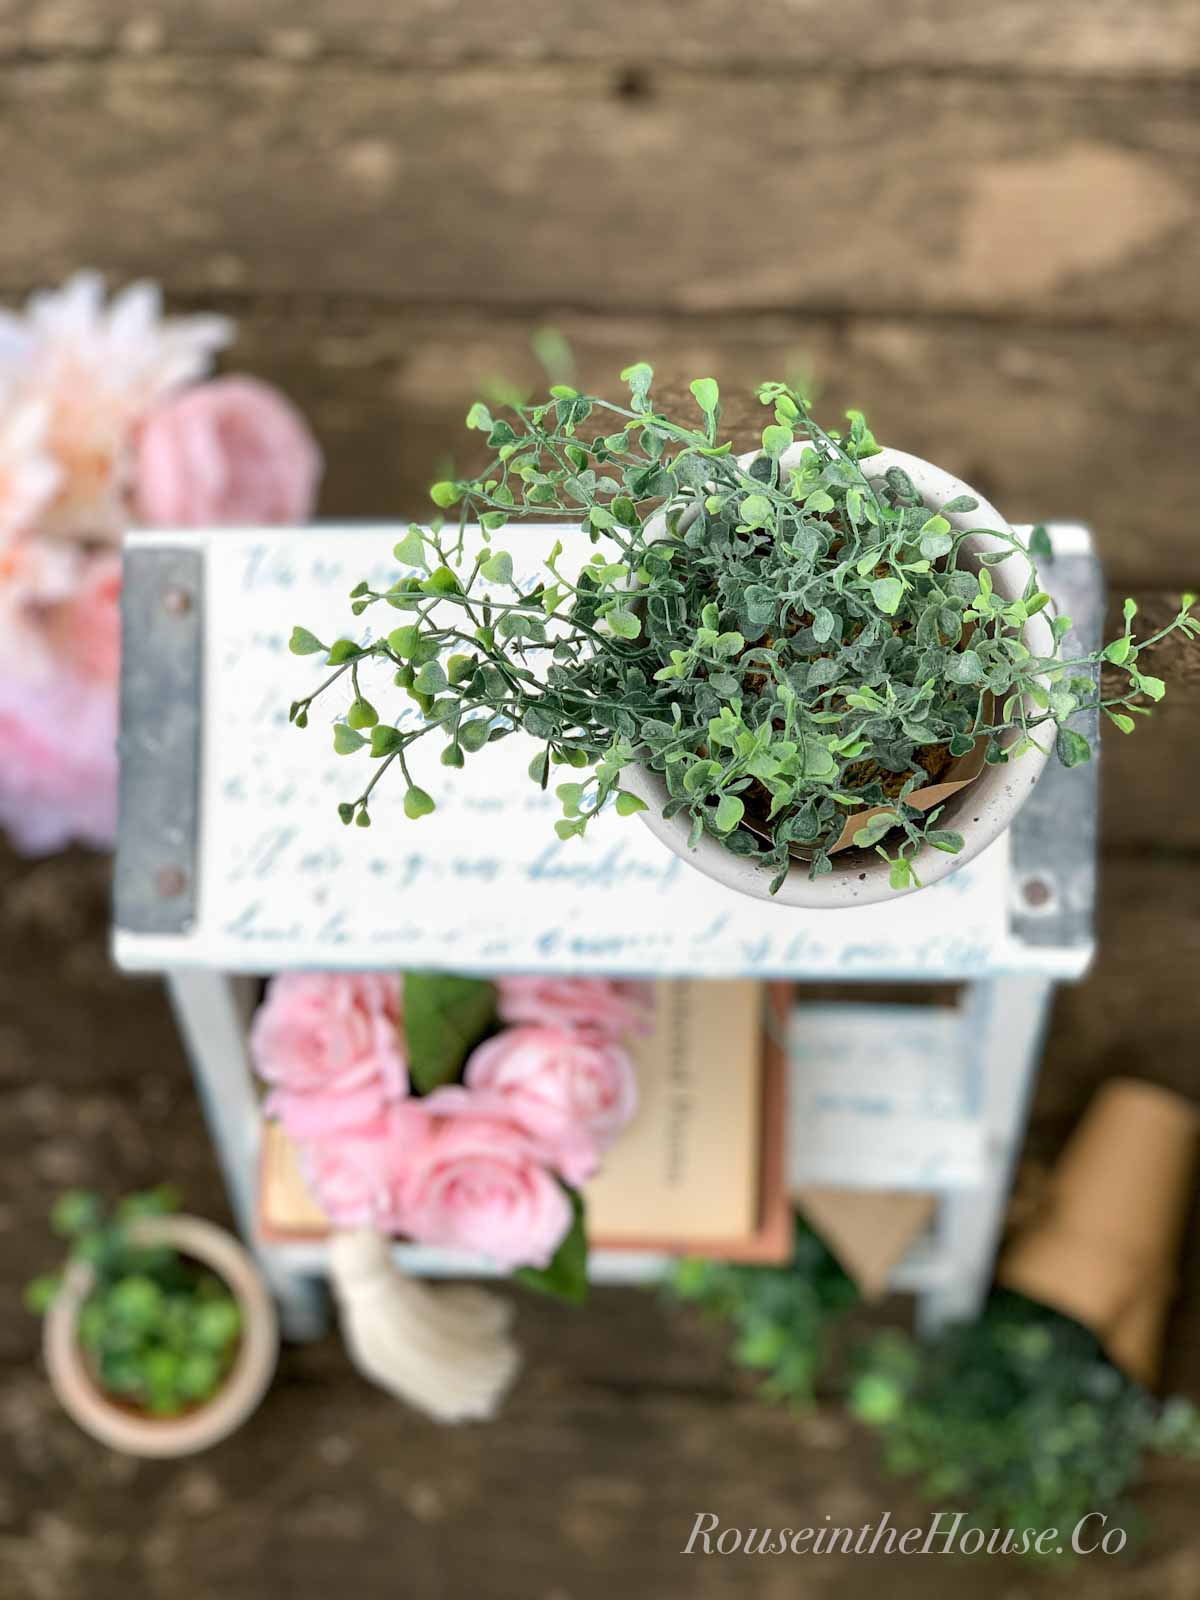 An overhead shot of a step ladder turned into a decorative plant stand. Small faux plants sit on the top and bottom. A small planter of pink peonies sit on the first step.